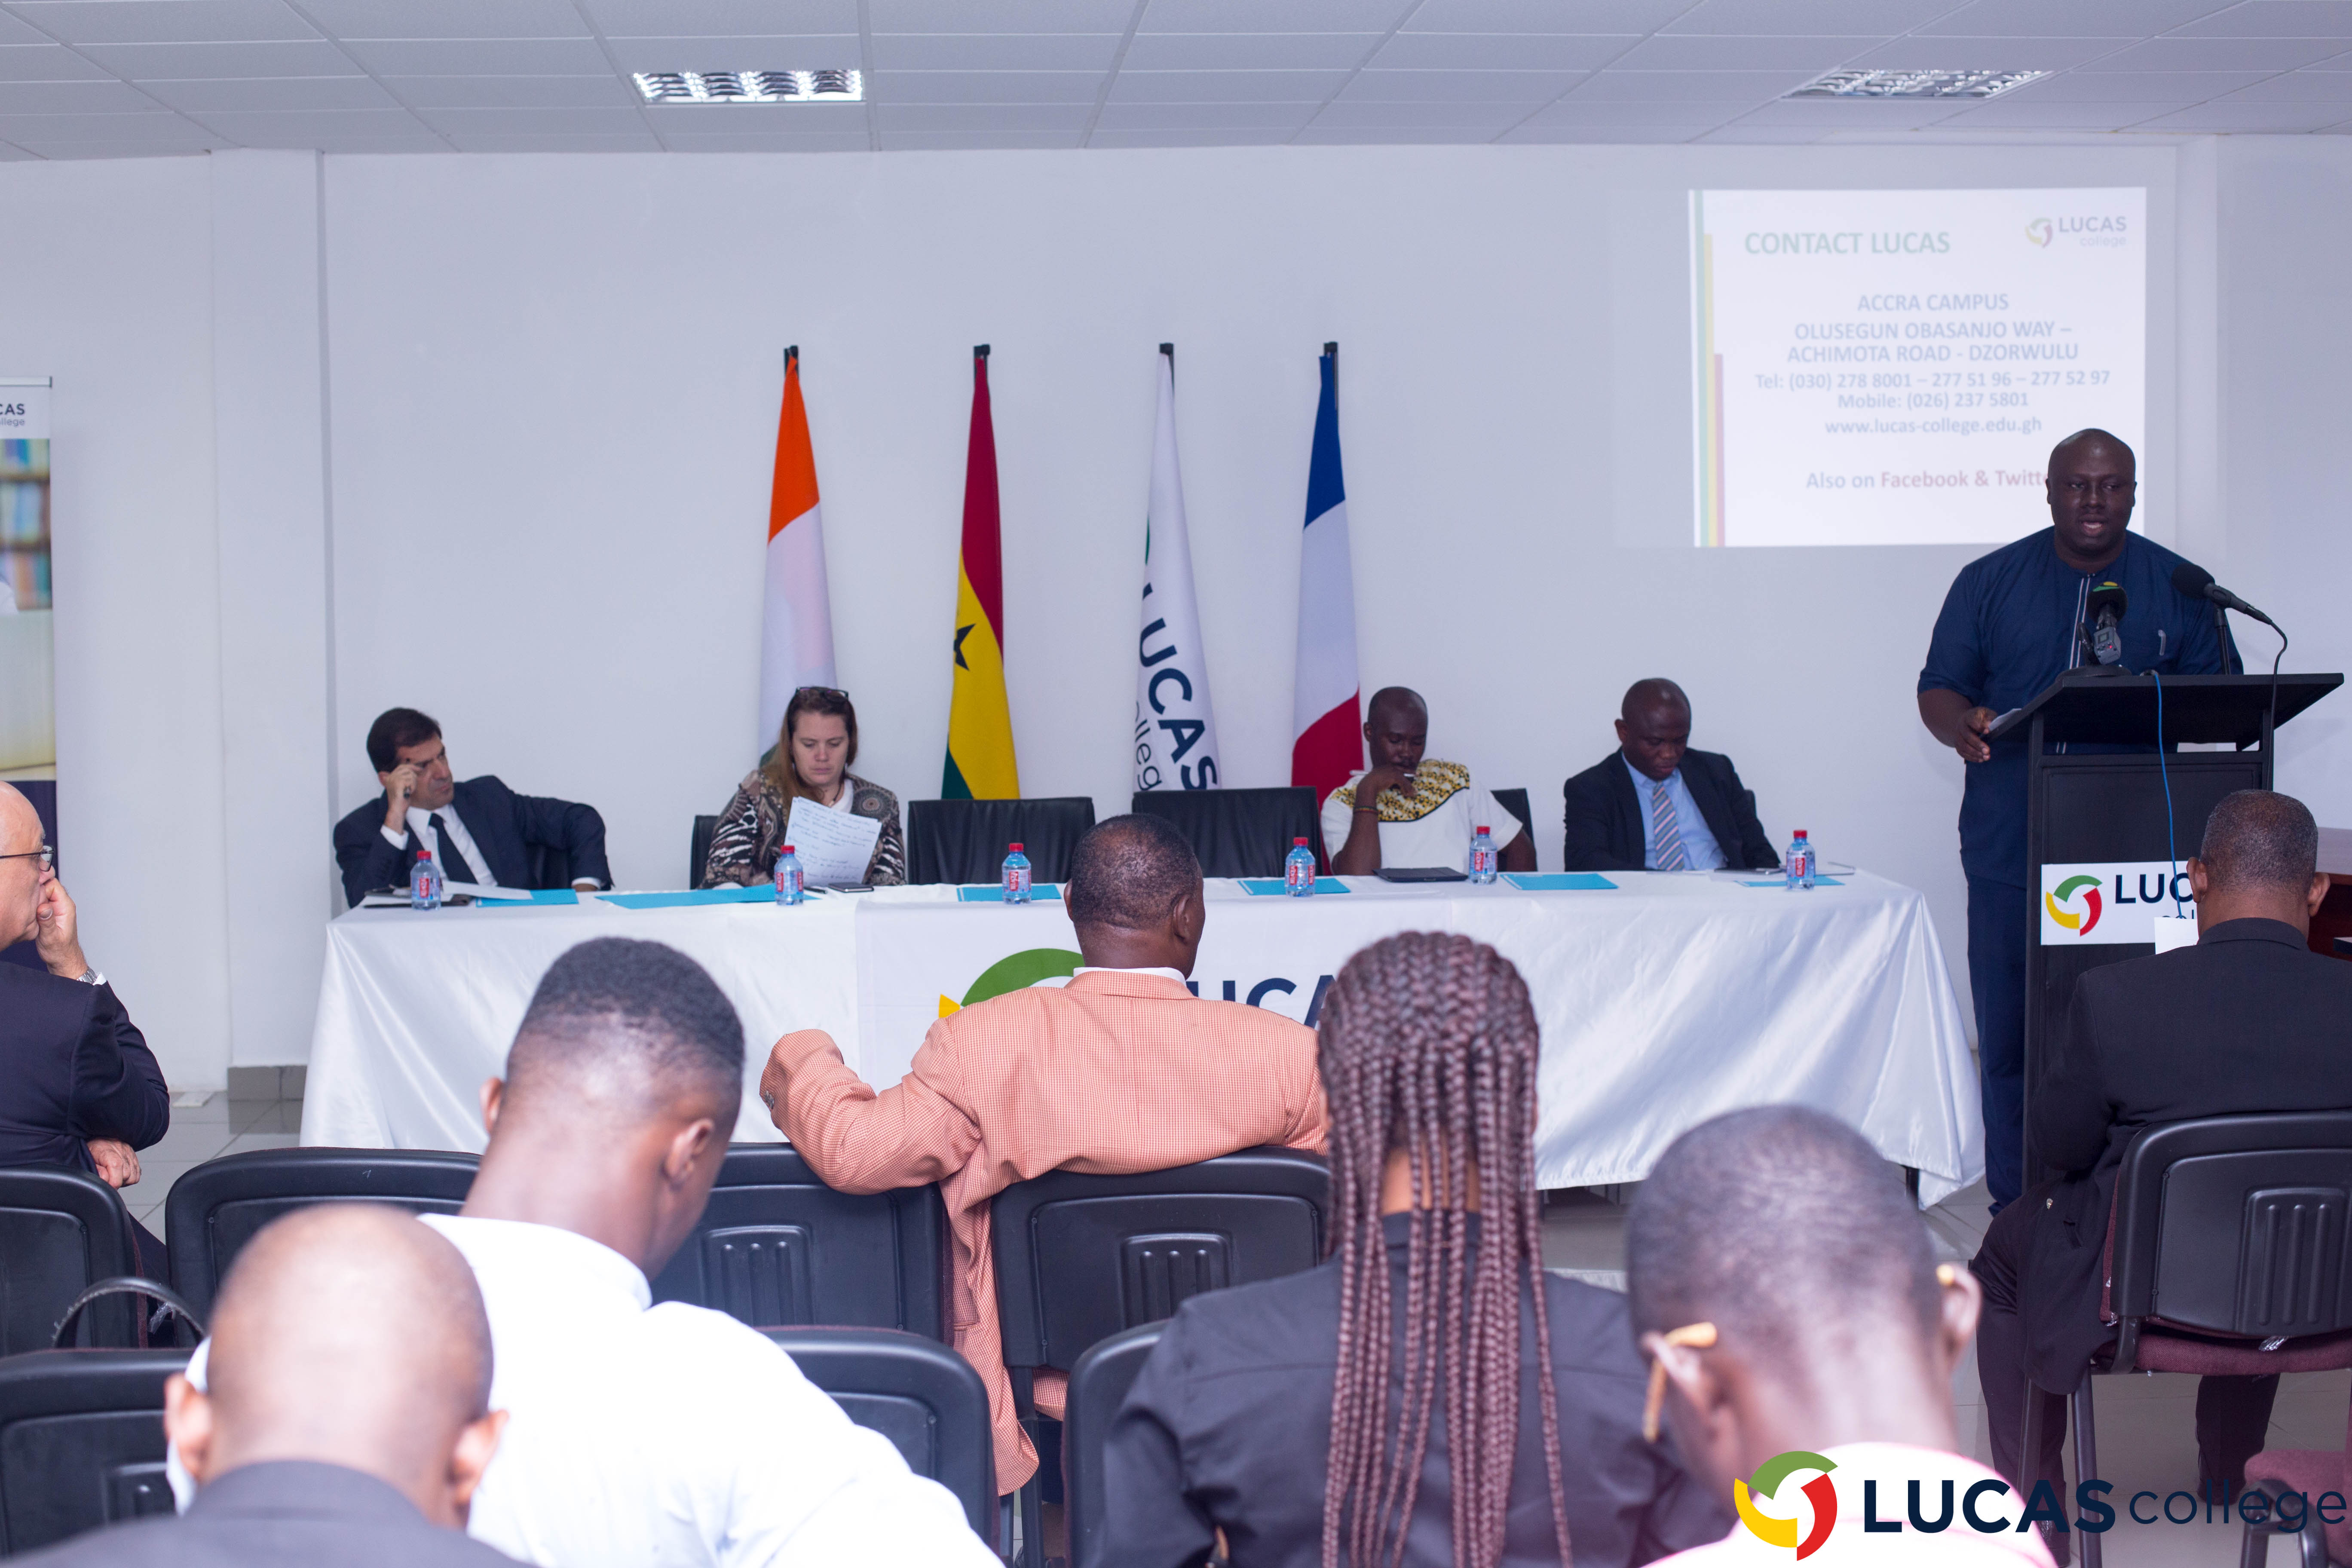 LUCAS College enters Ghana’s education sector